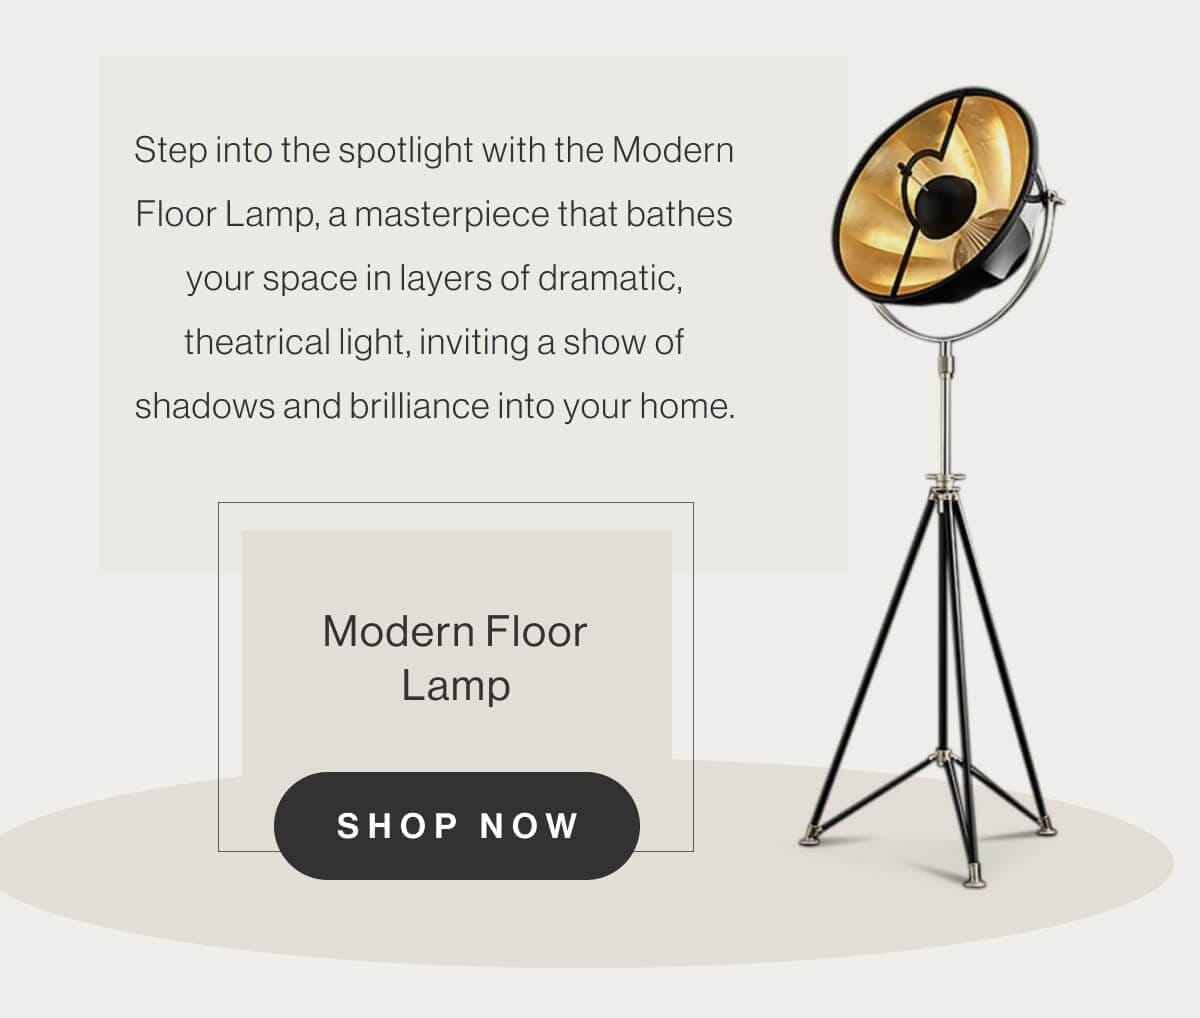 Modern Floor Lamp - Step into the spotlight with the Modern Floor Lamp, a masterpiece that bathes your space in layers of dramatic, theatrical light, inviting a show of shadows and brilliance into your home. - Shop Now